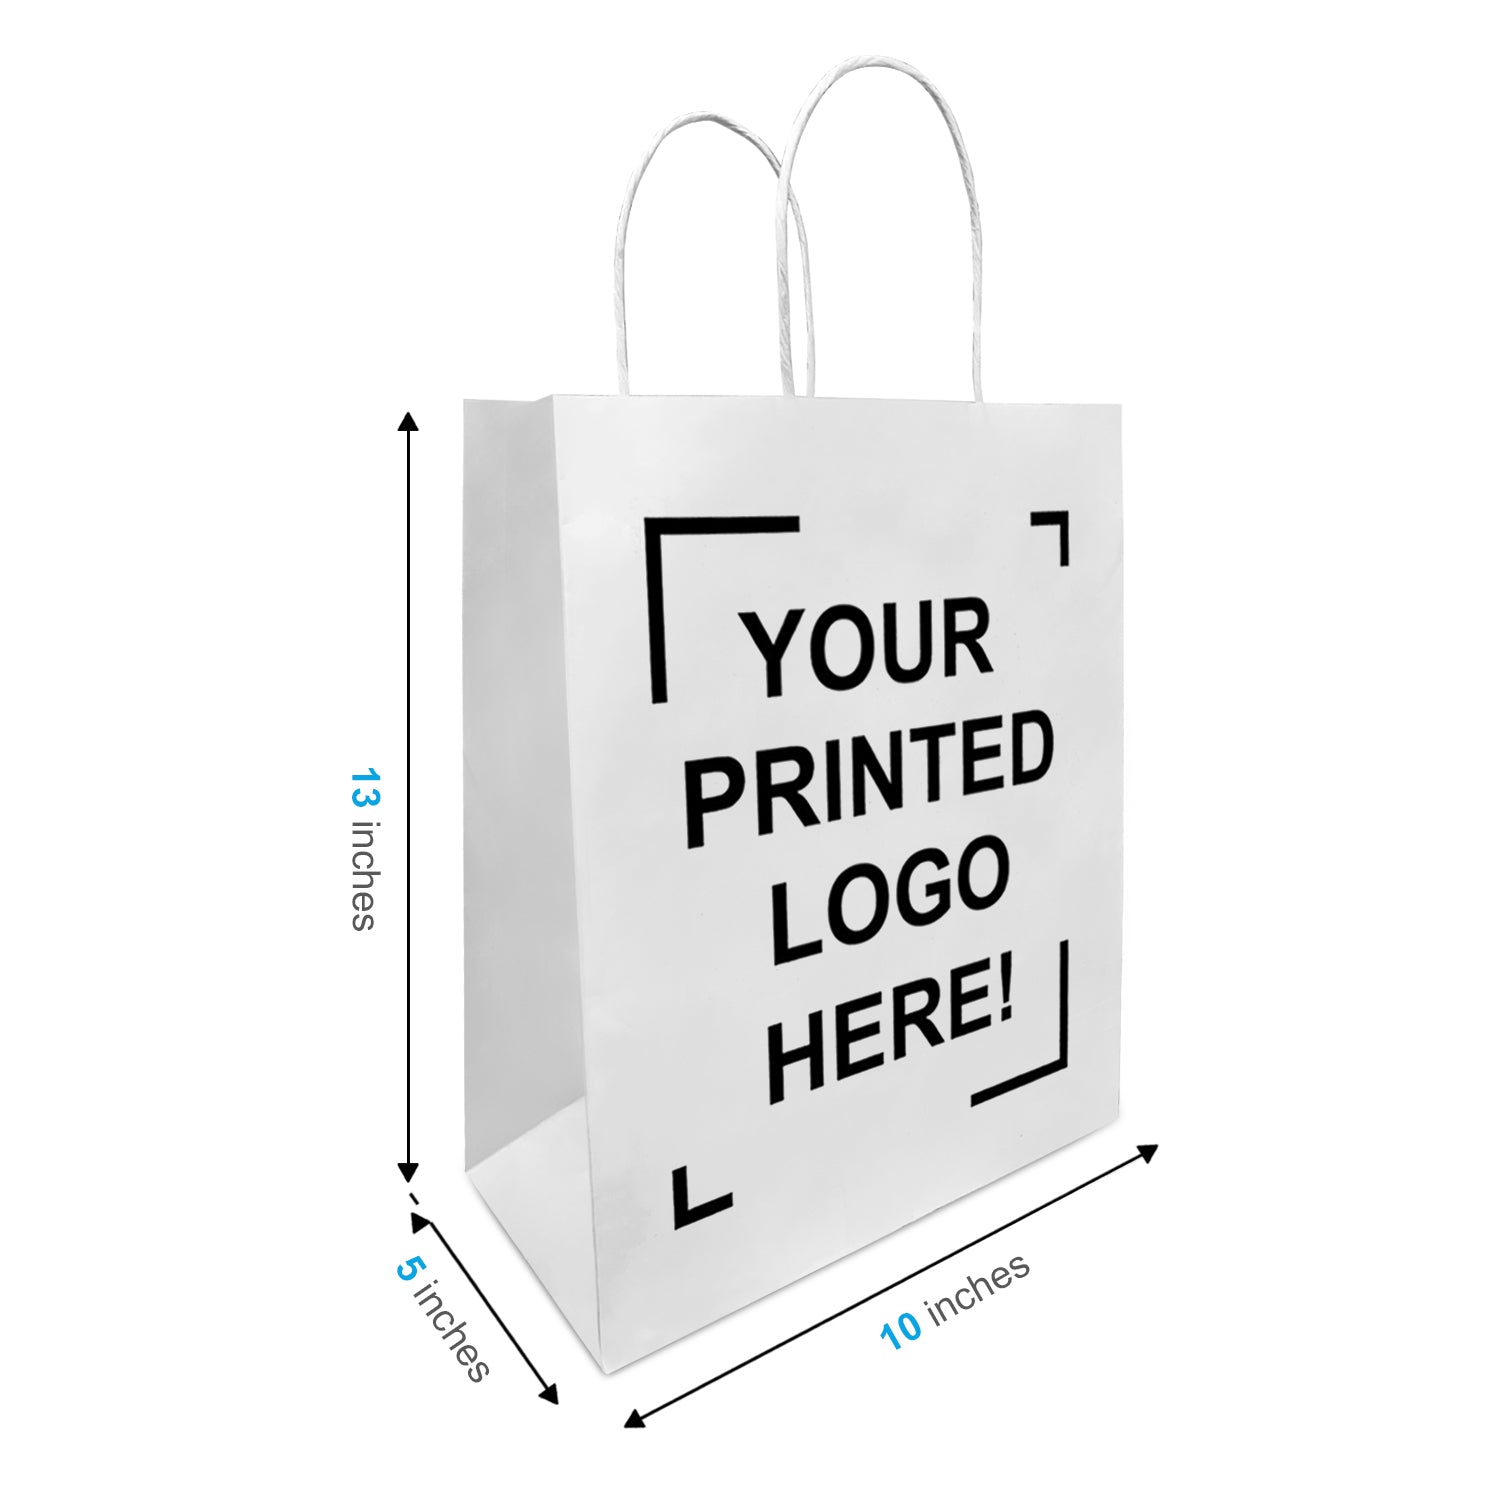 250 Pcs, Debbie, 10x5x13 inches, White Kraft Paper Bags, with Twisted Handle, Full Color Custom Print